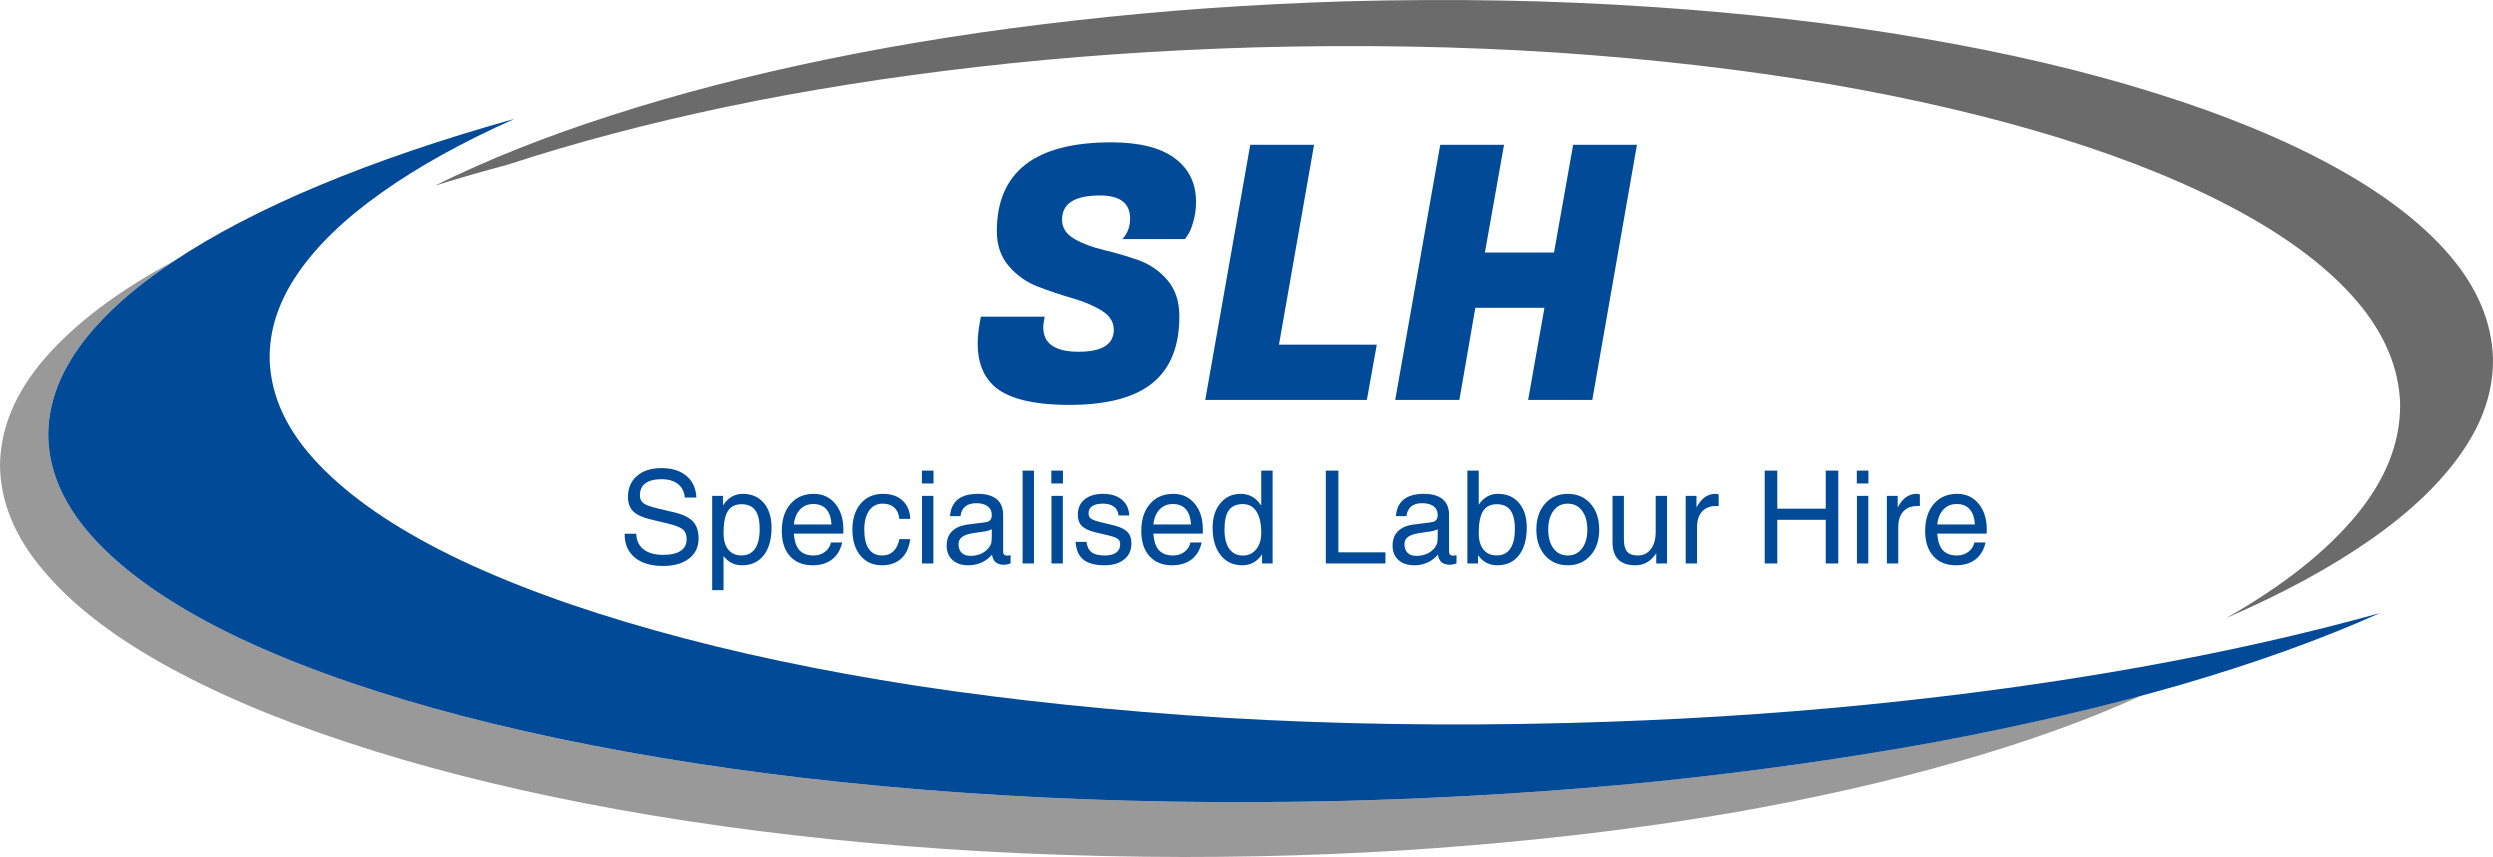 Specialised Labour Hire | WorkDash